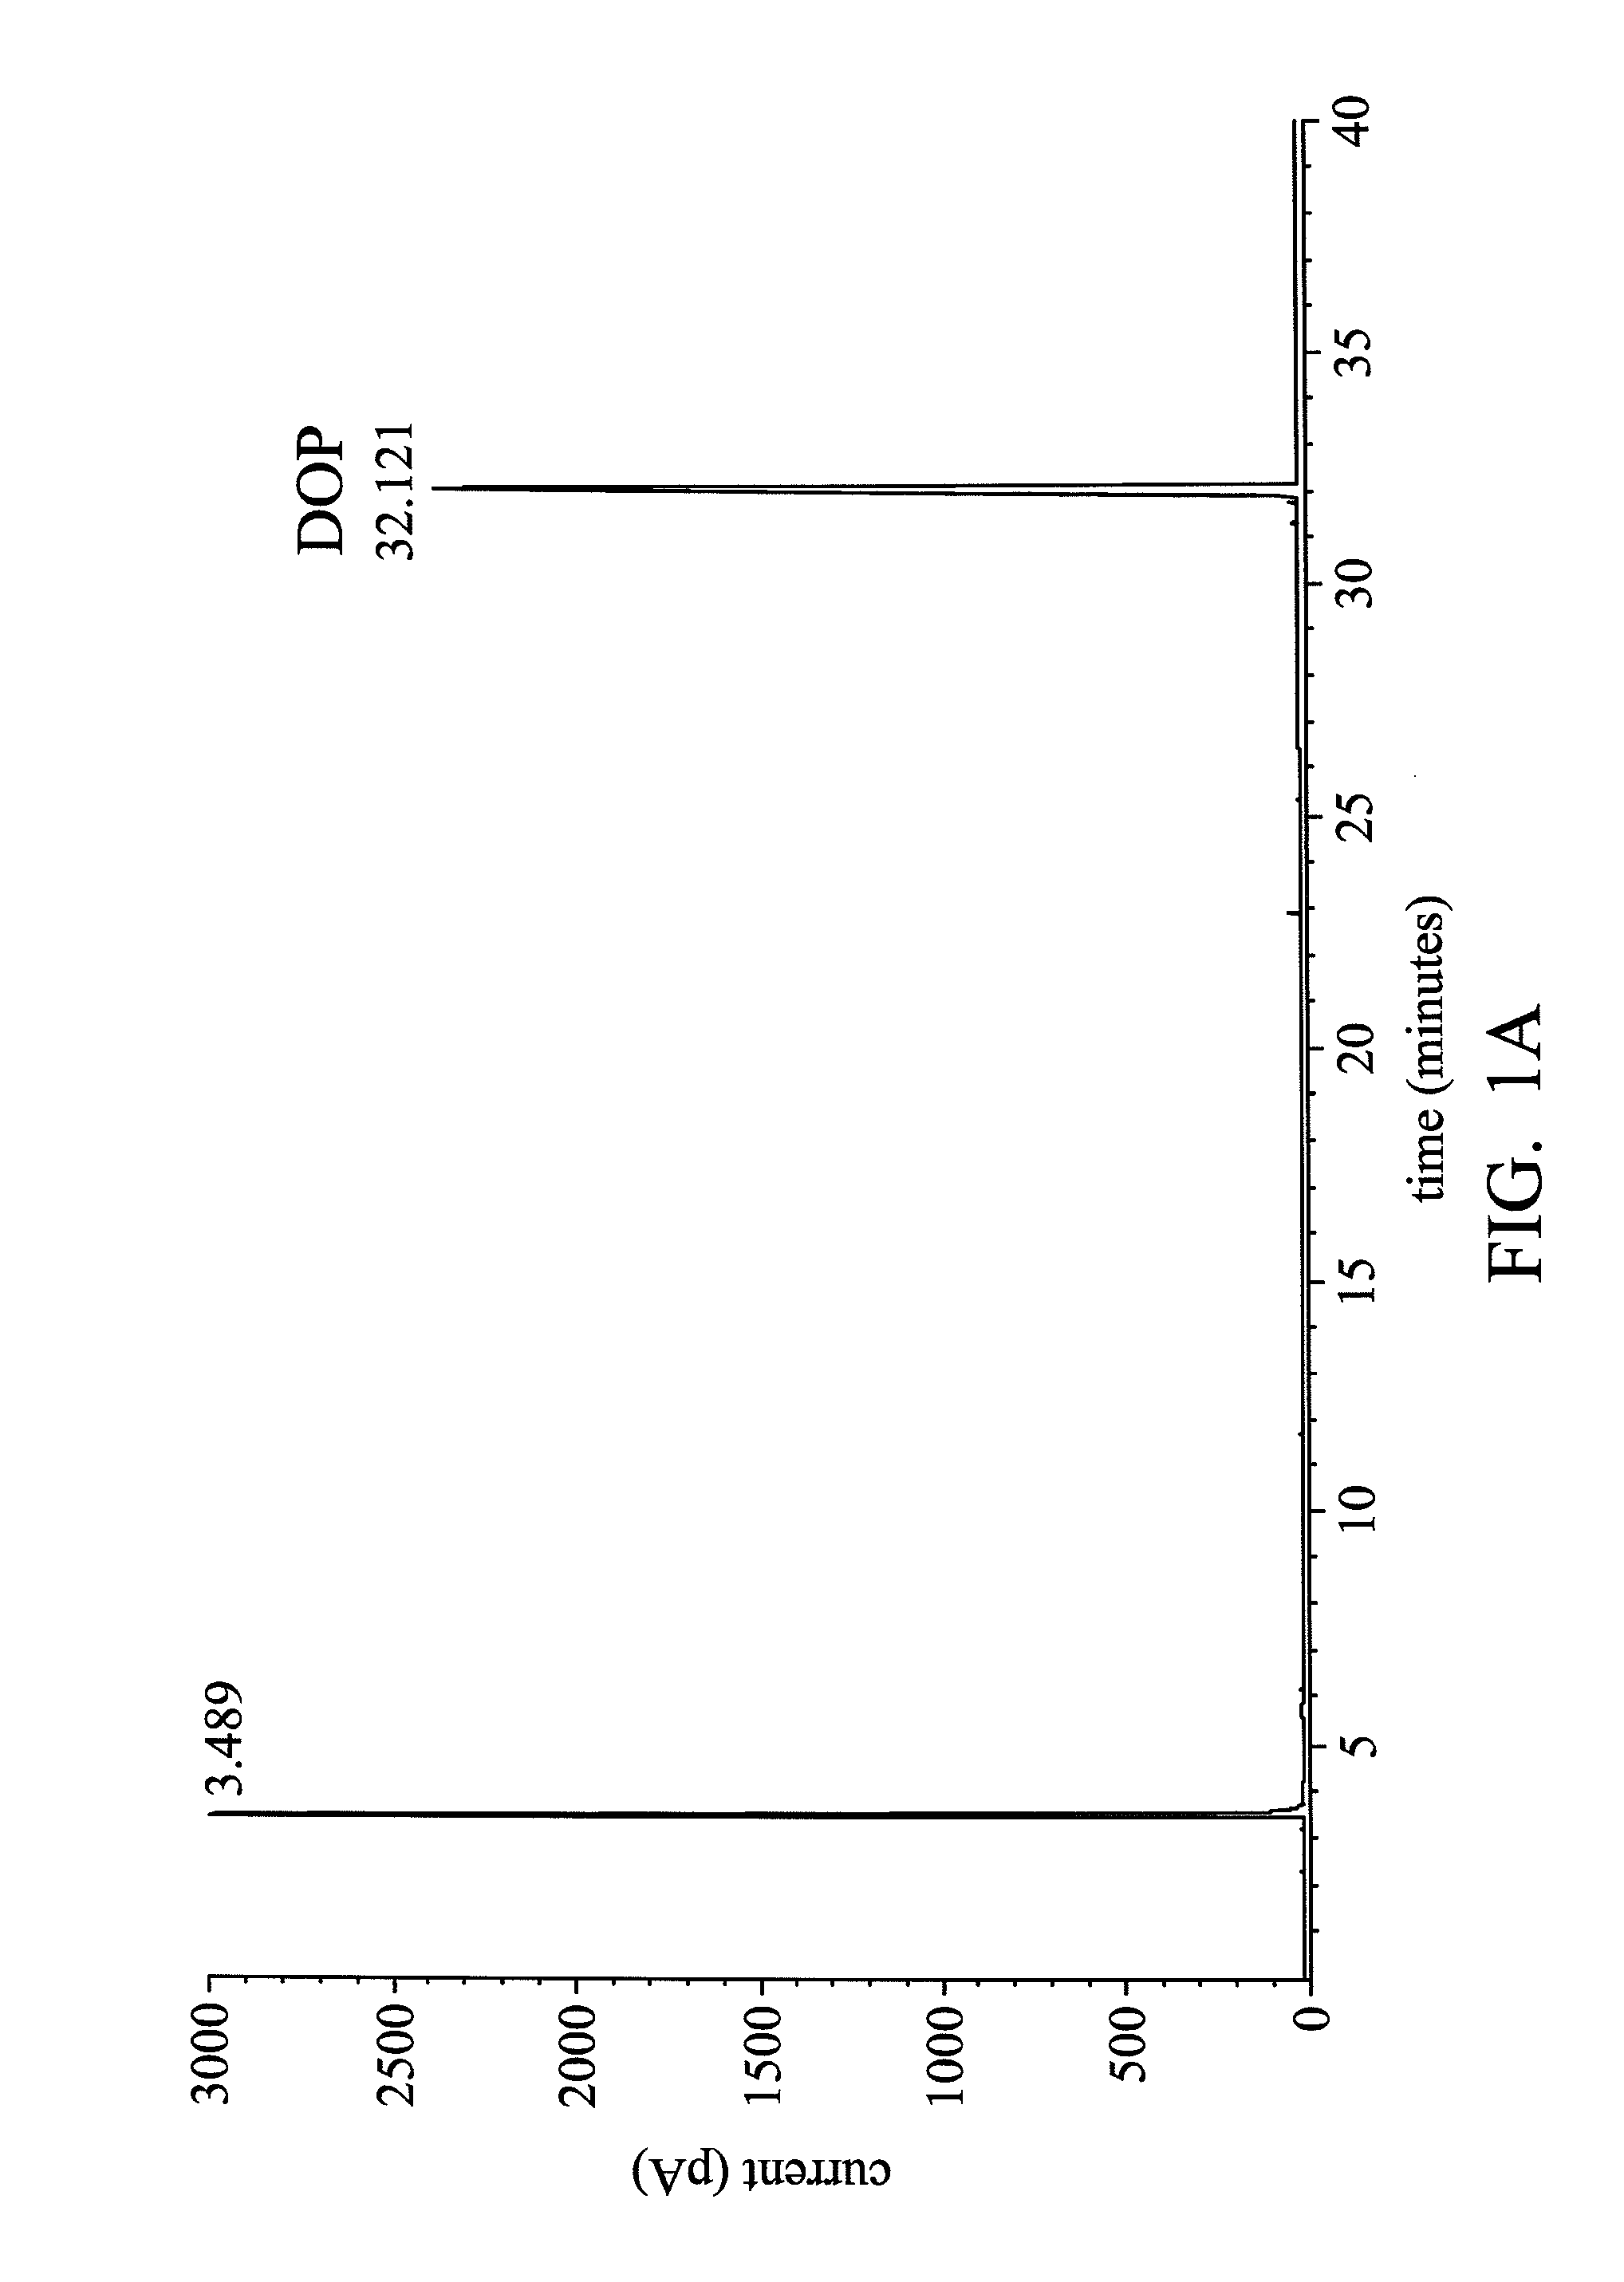 Process for hydrogenation of polycarboxylic acids or derivatives therof